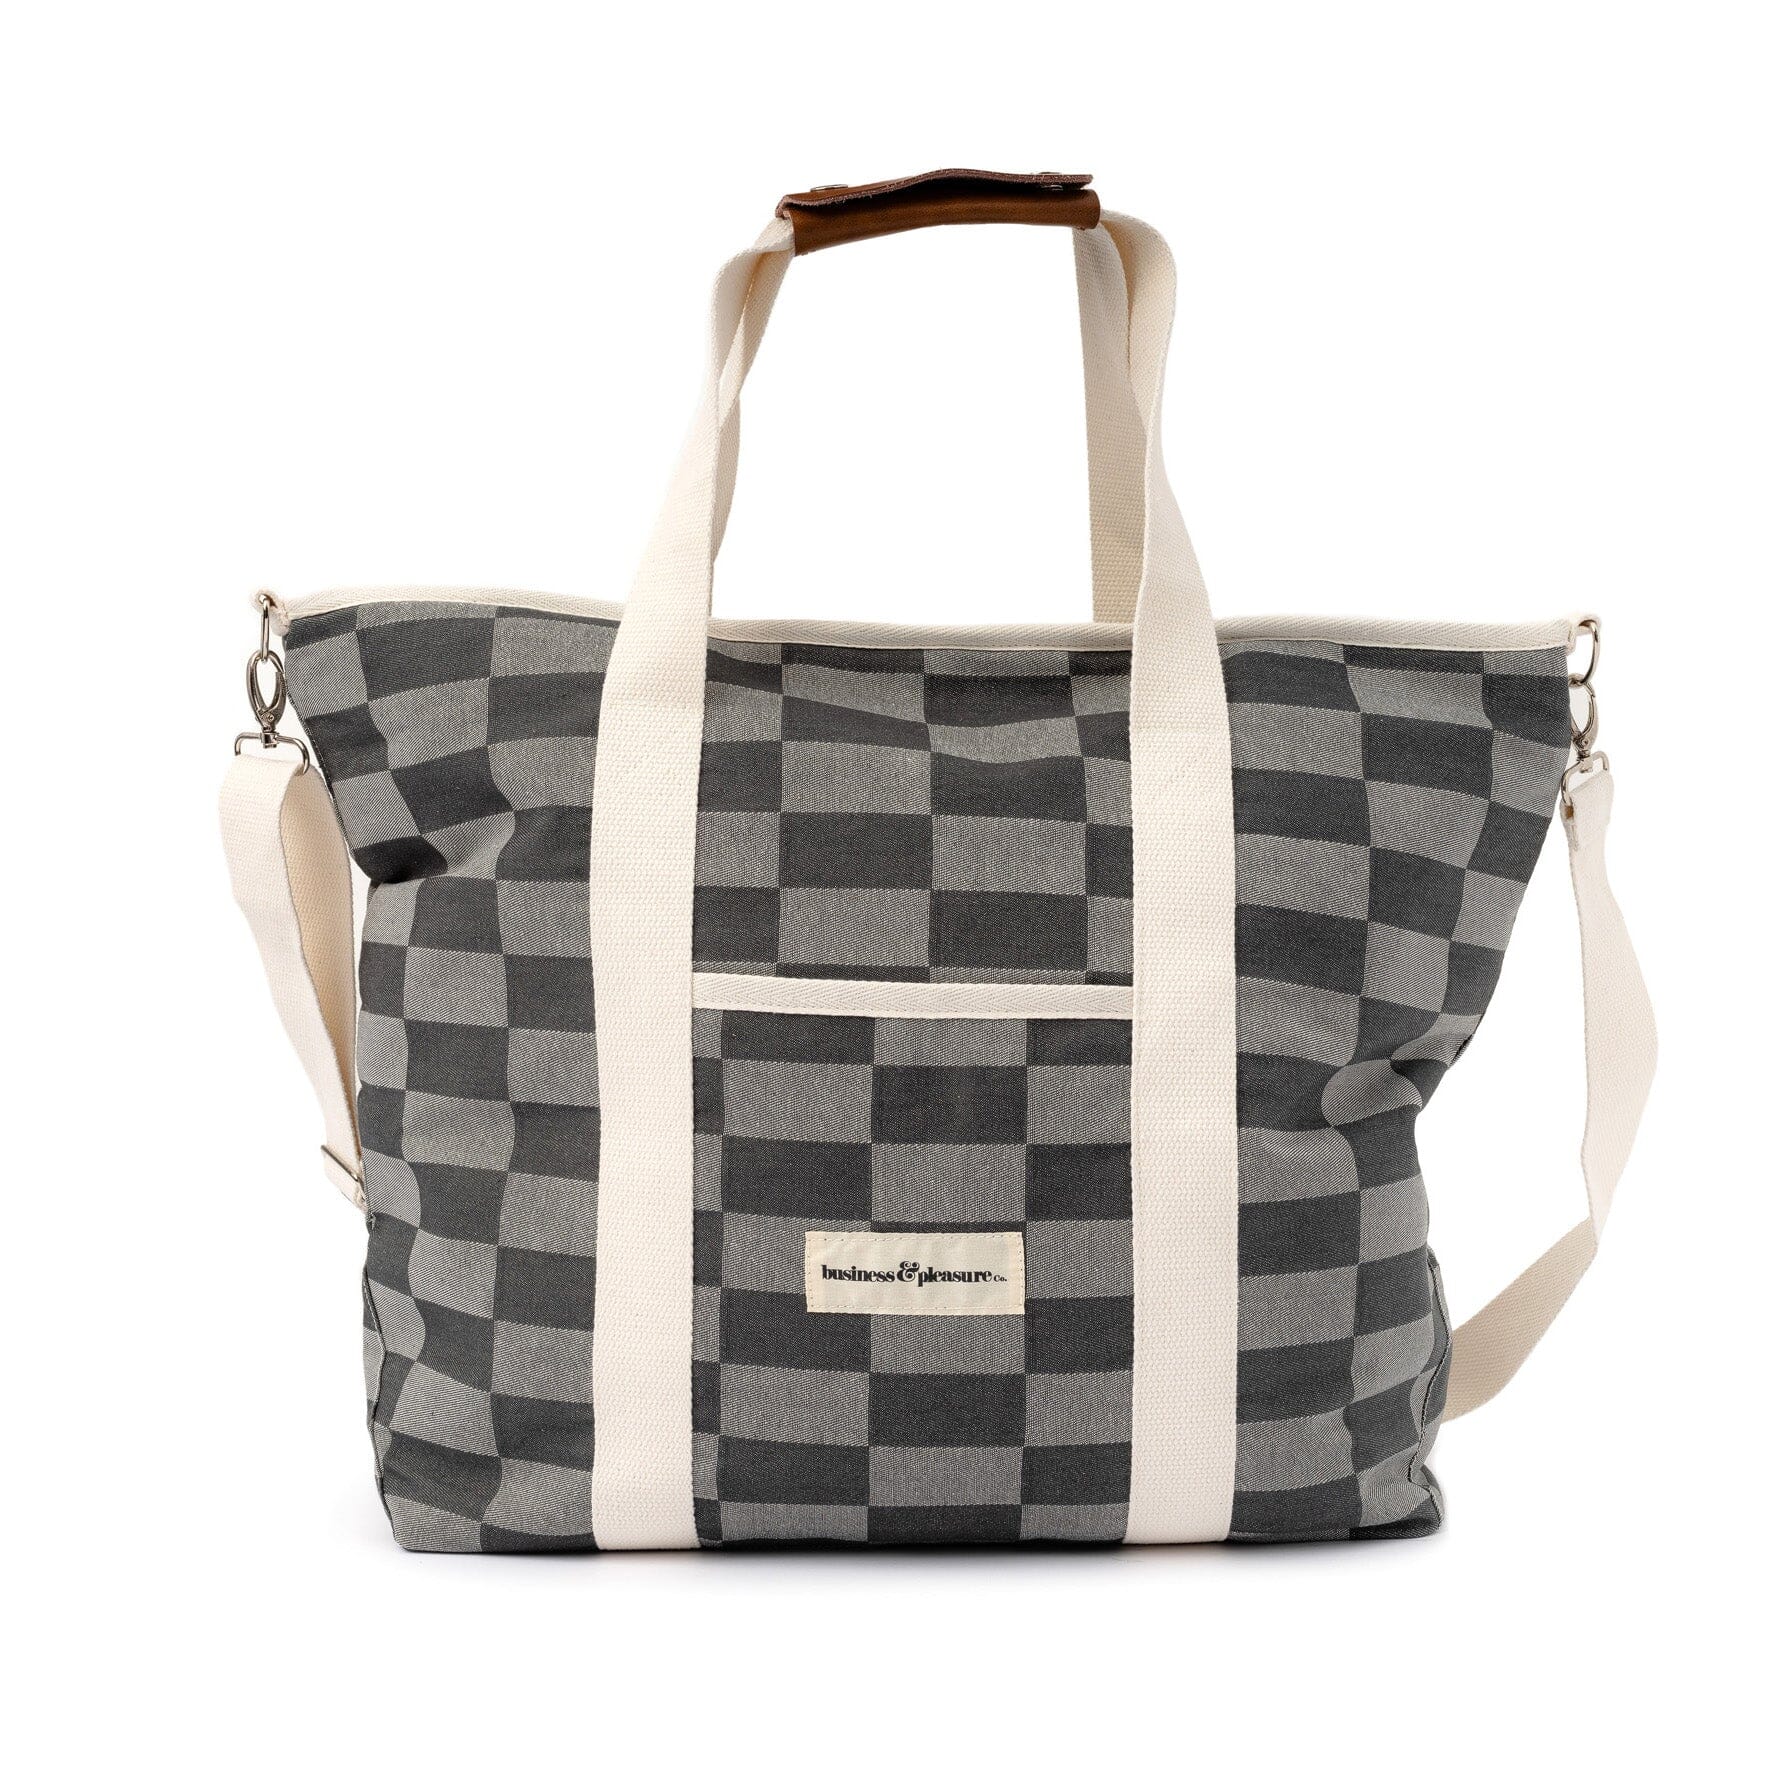 The Cooler Tote Bag - Vintage Green Check Cooler Tote Business & Pleasure Co 